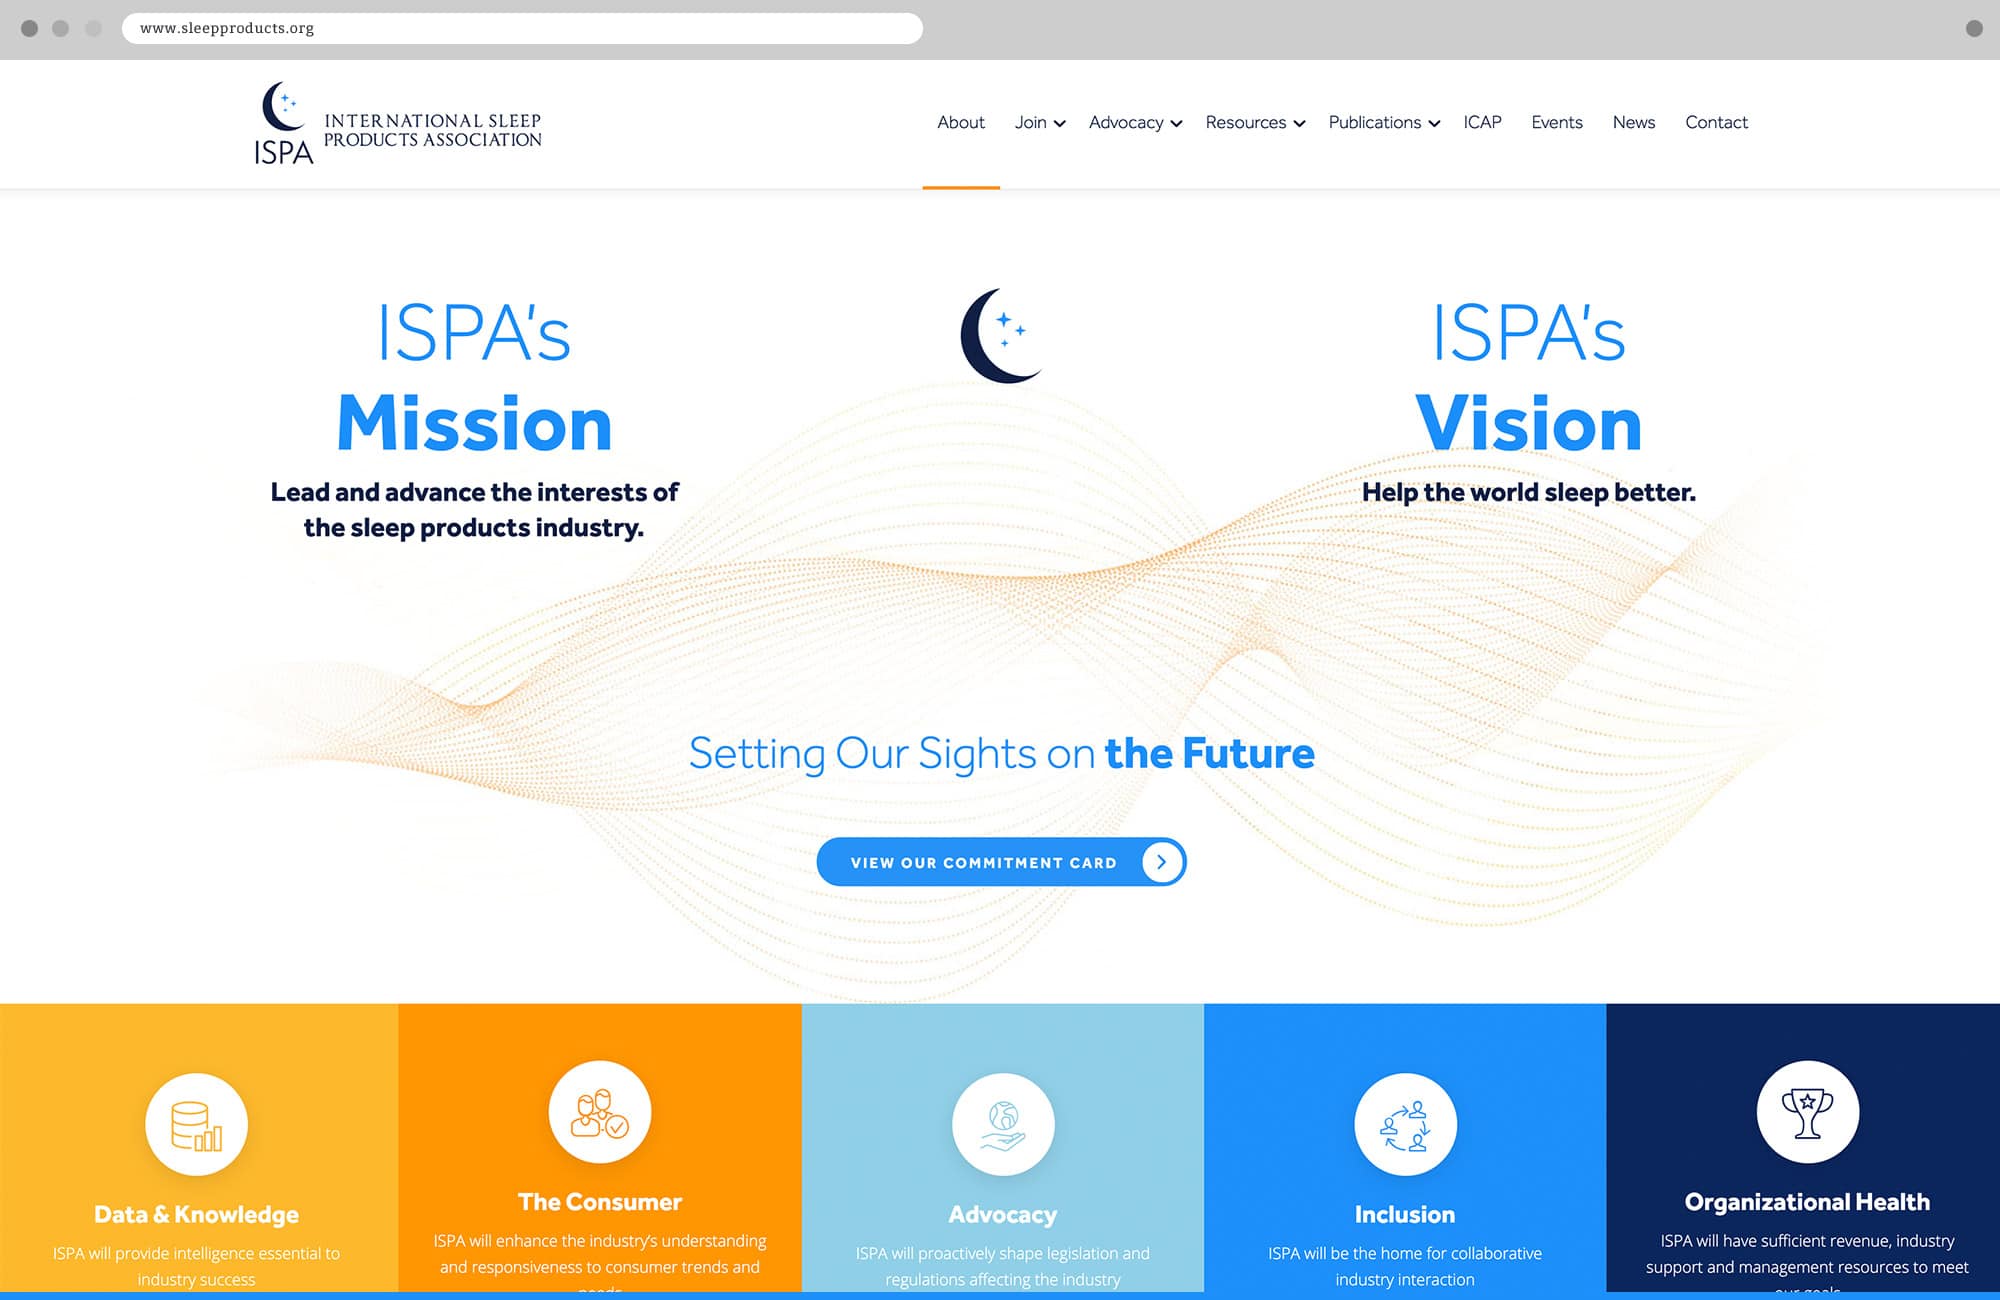 Punch - International Sleep Products Association Mission and Vision Page